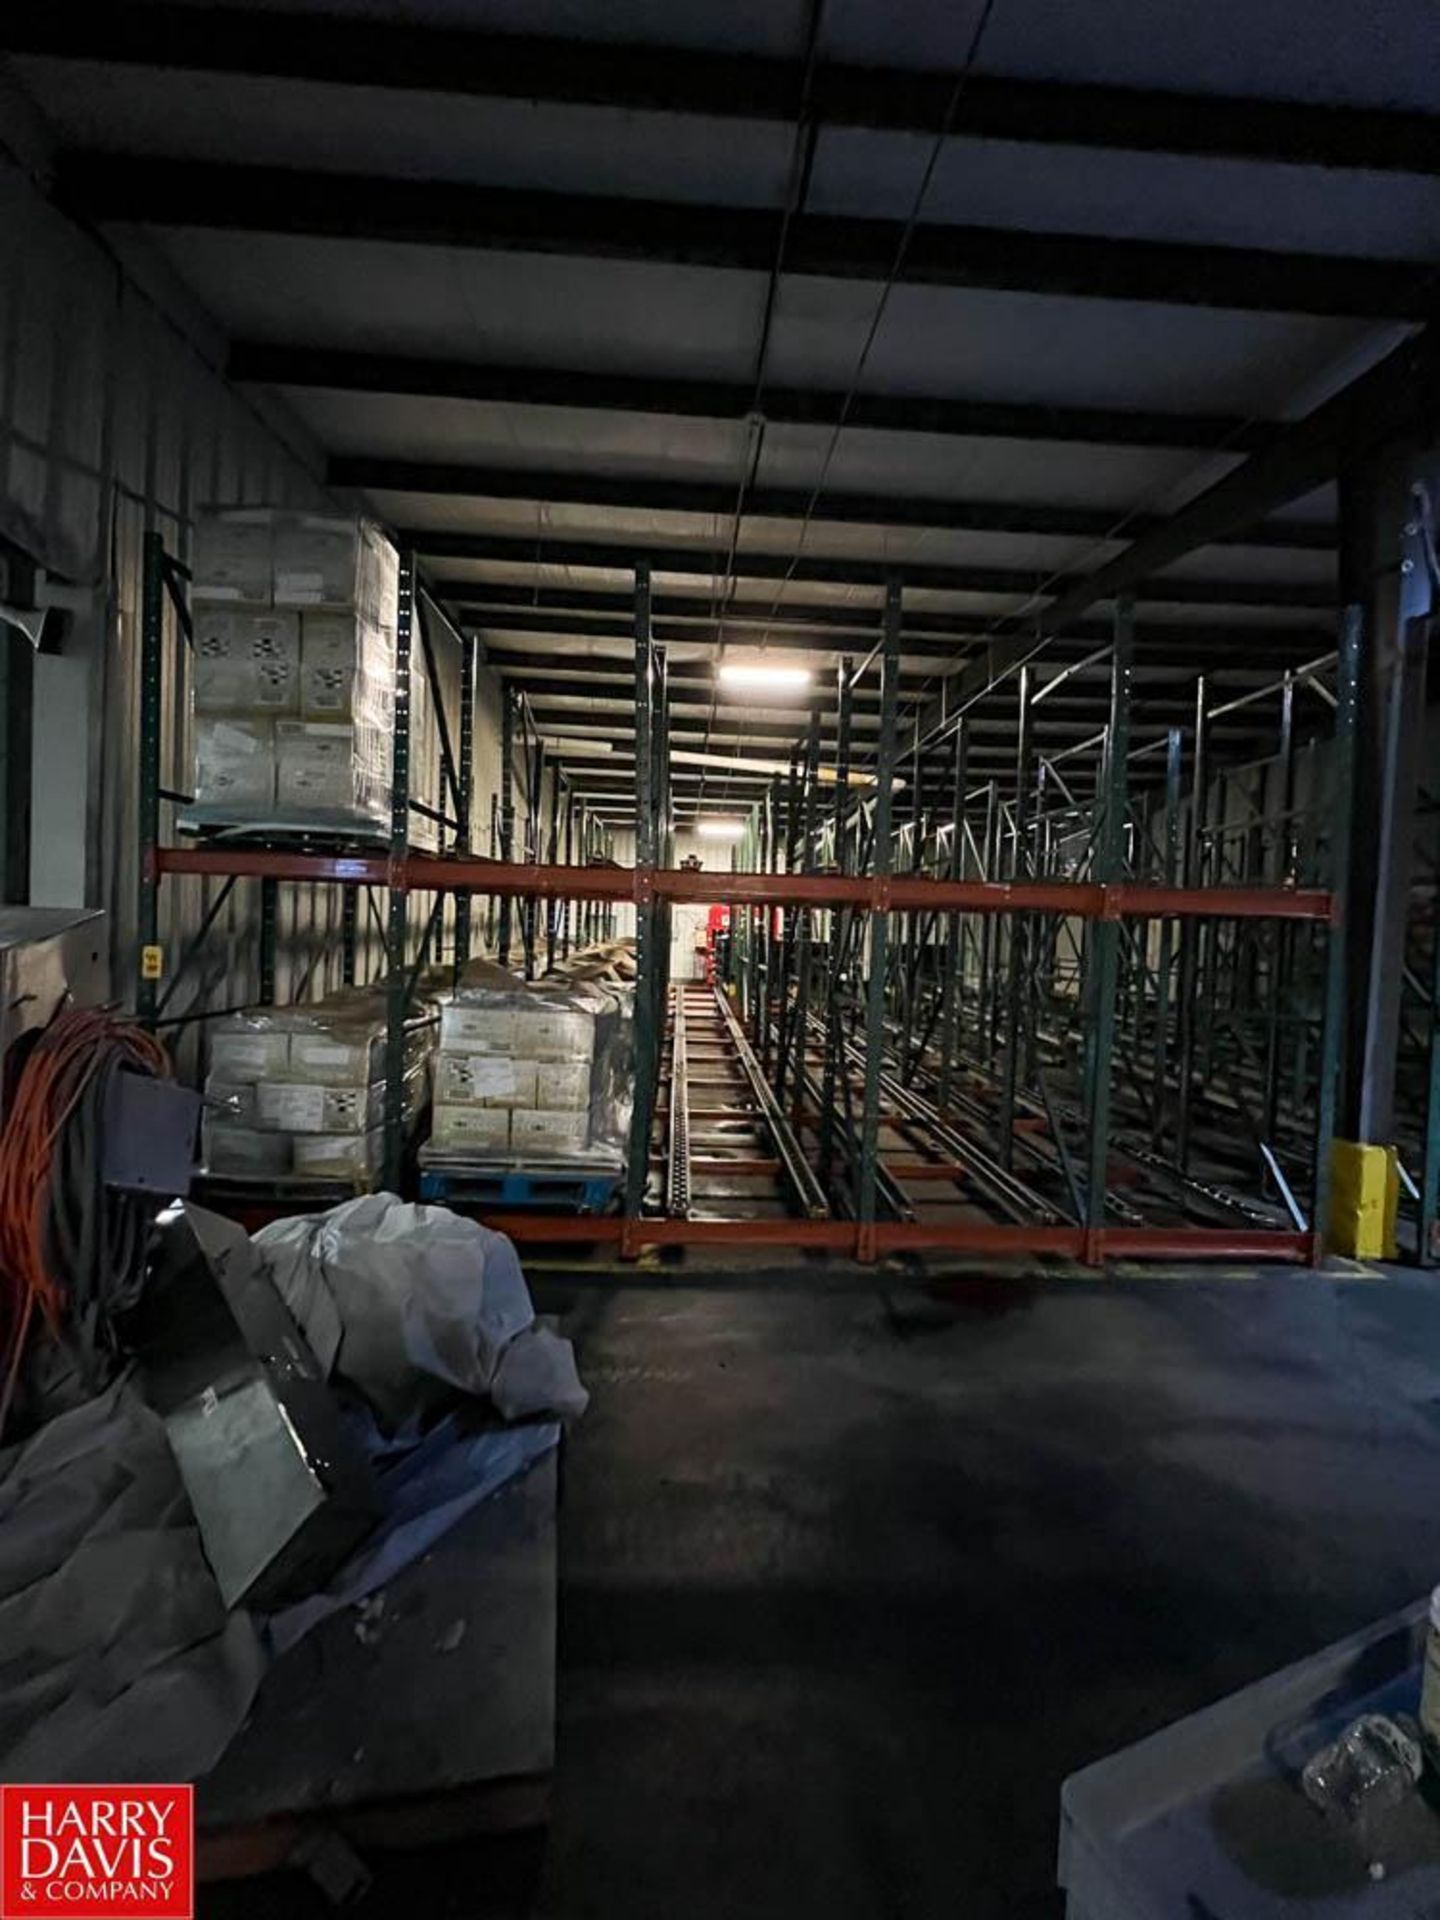 Sections 5-Deep Roller Pallet Racking Systems, Dimensions = 12' x 4' - Rigging Fee: $3,000